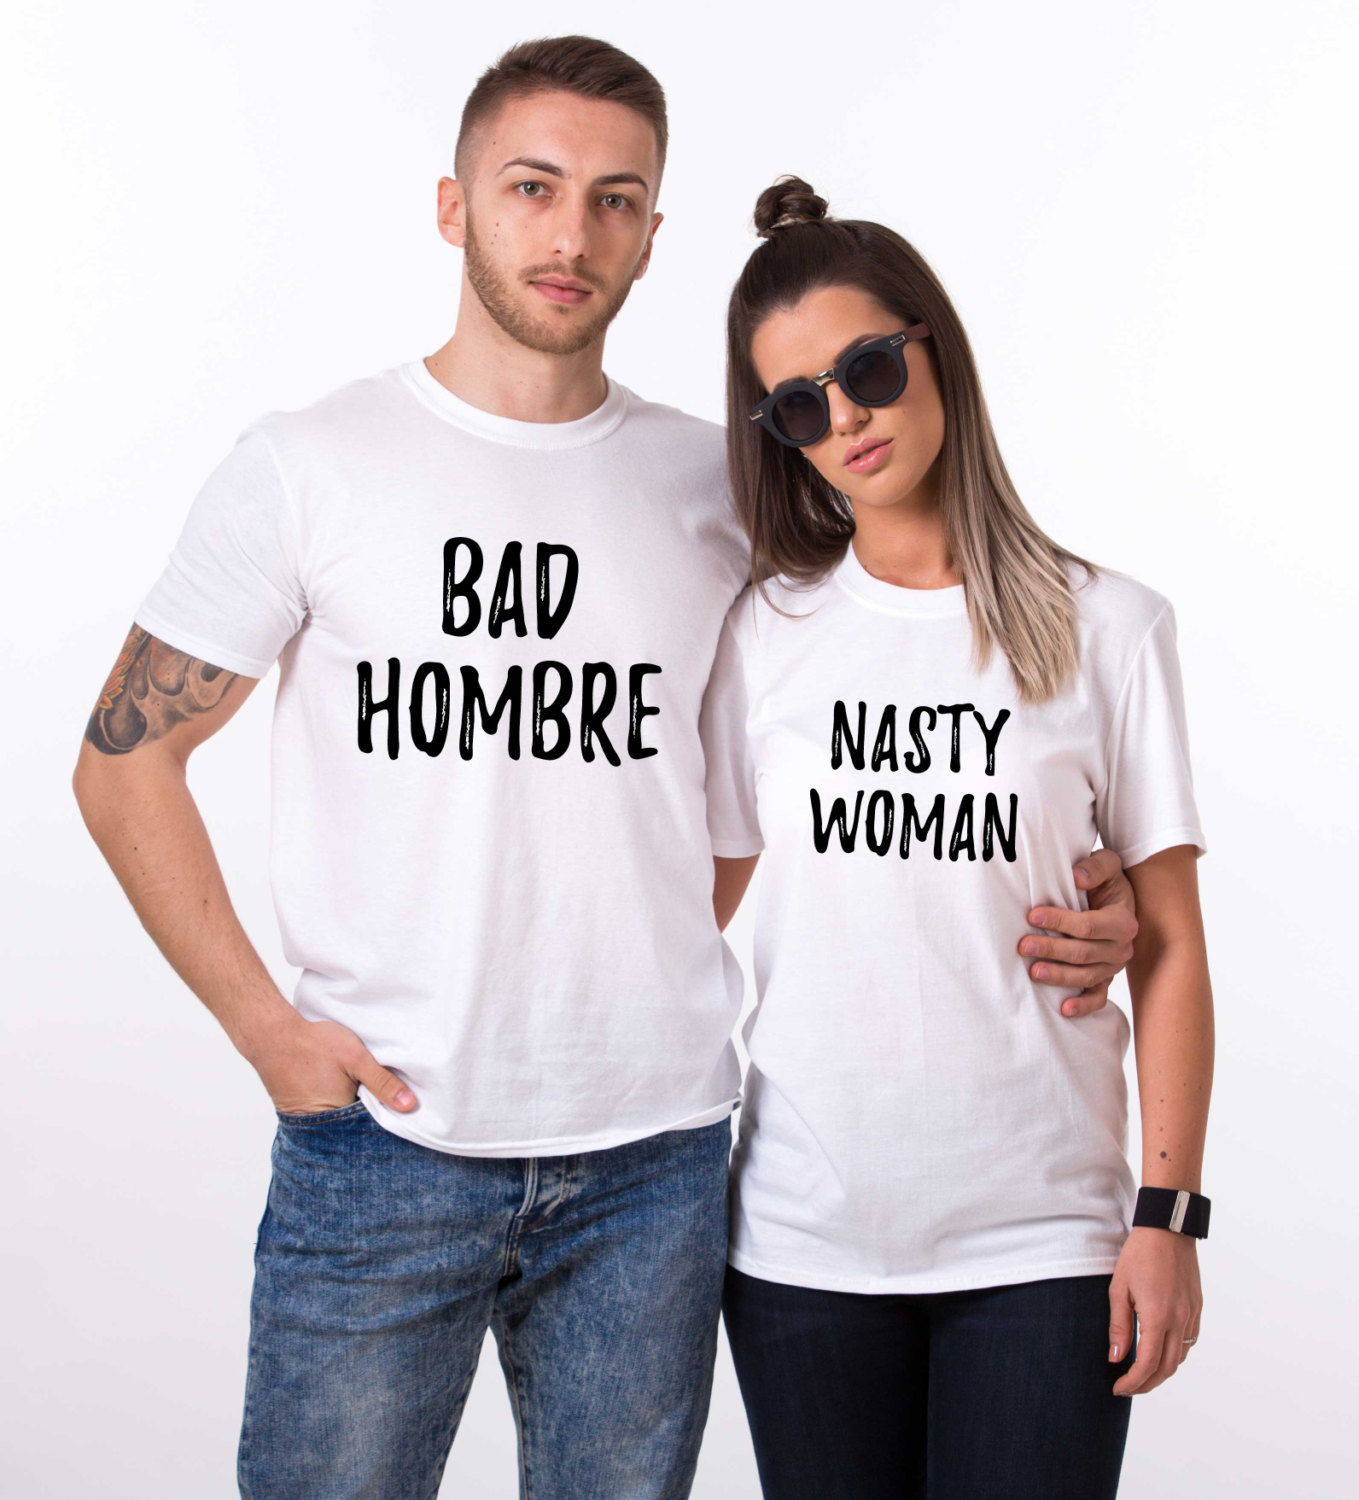 Dirty Couples Shirts gets laid